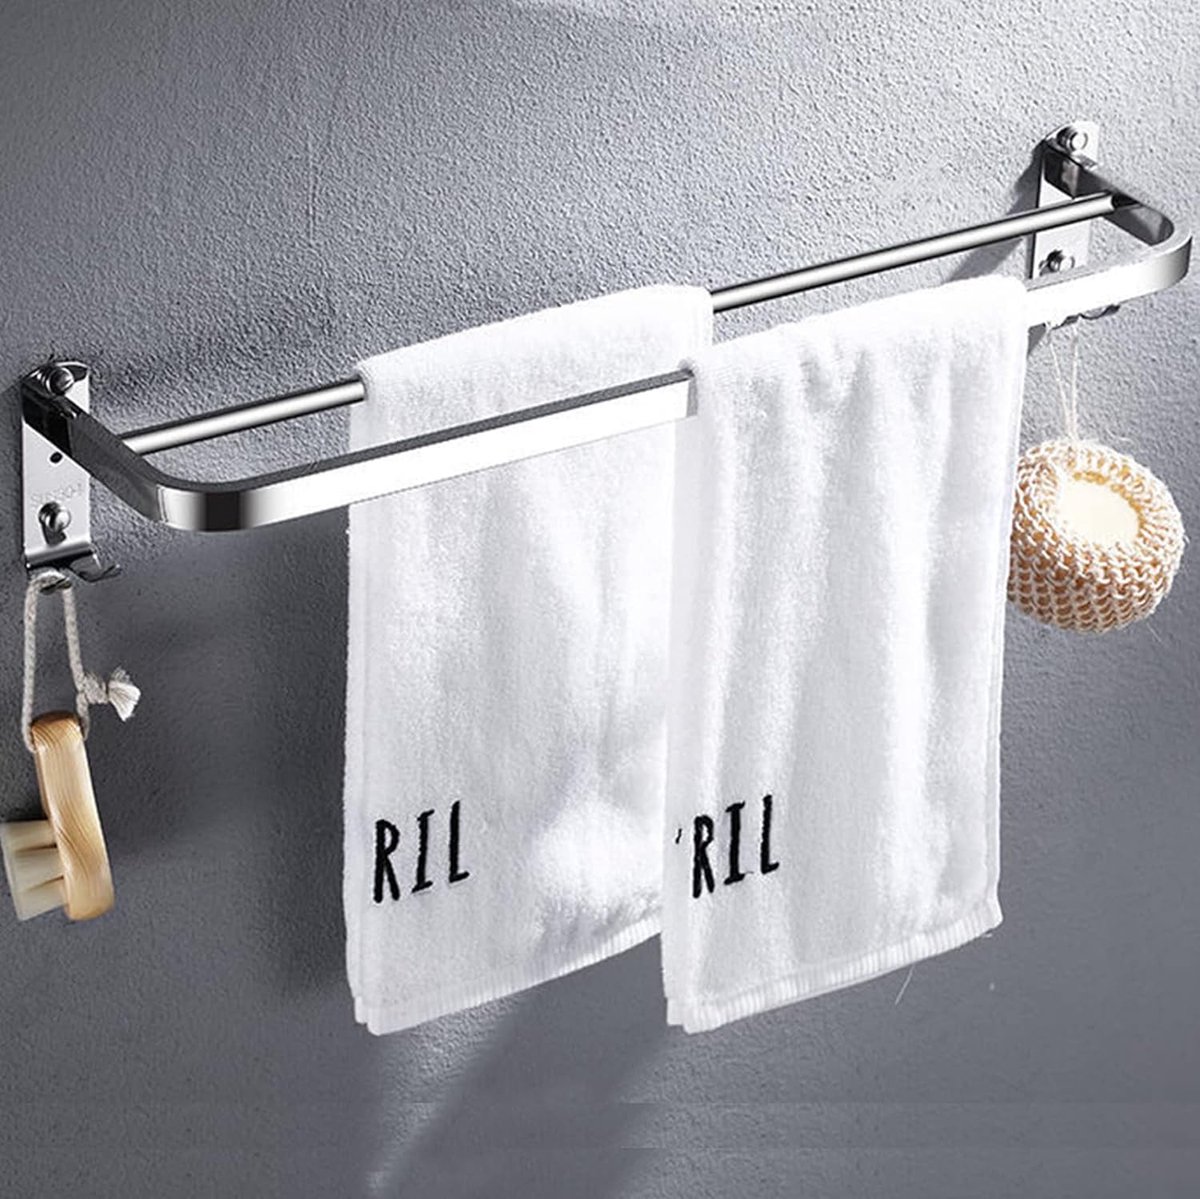 Bathroom Towel Holder, Towel Rail, No Drilling, Towel Rail with Two Towel Holders and Hook Design, Stainless Steel Towel Rail